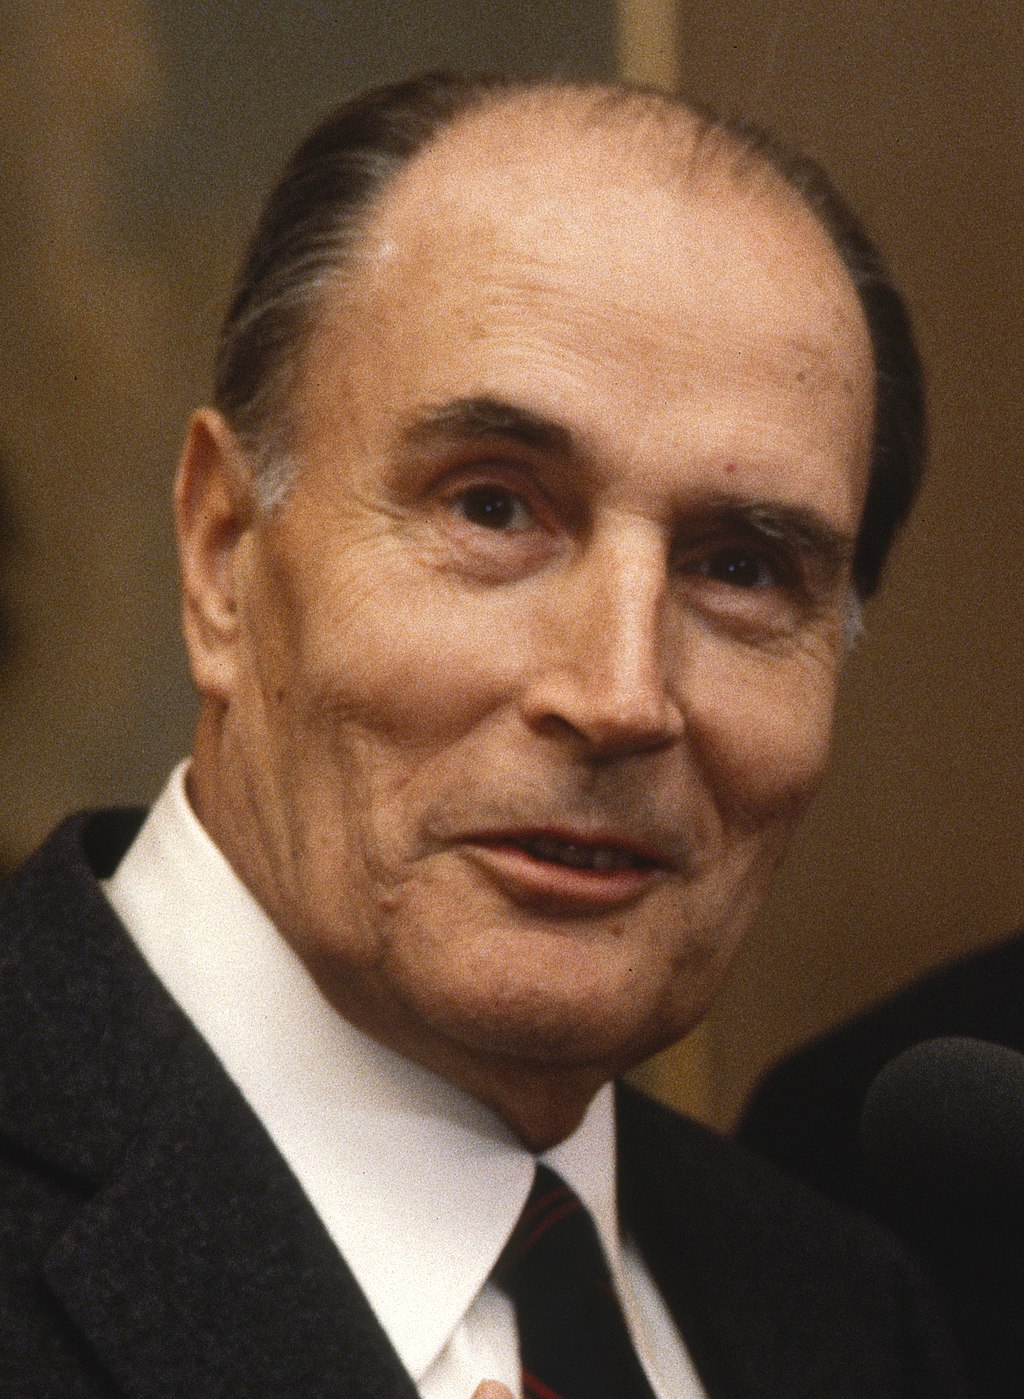 François Mitterrand 4. Presidents of the Fifth Republic of France